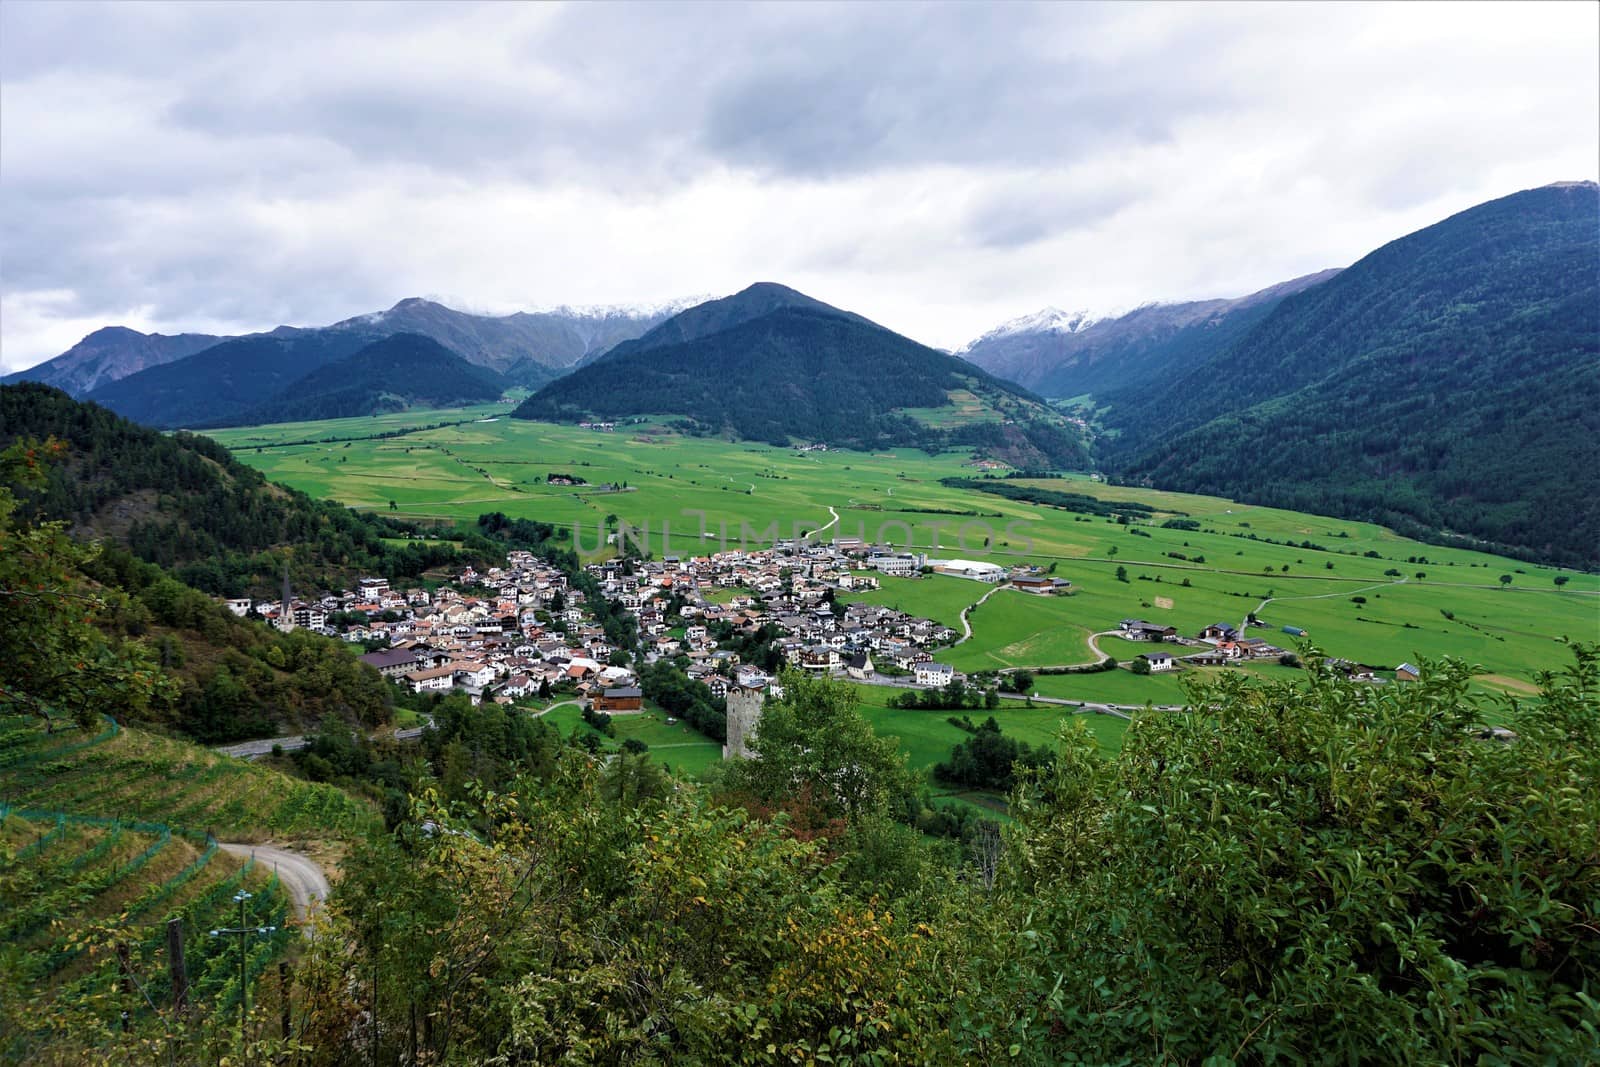 View over the municipality of Mals in South Tyrol, Italy